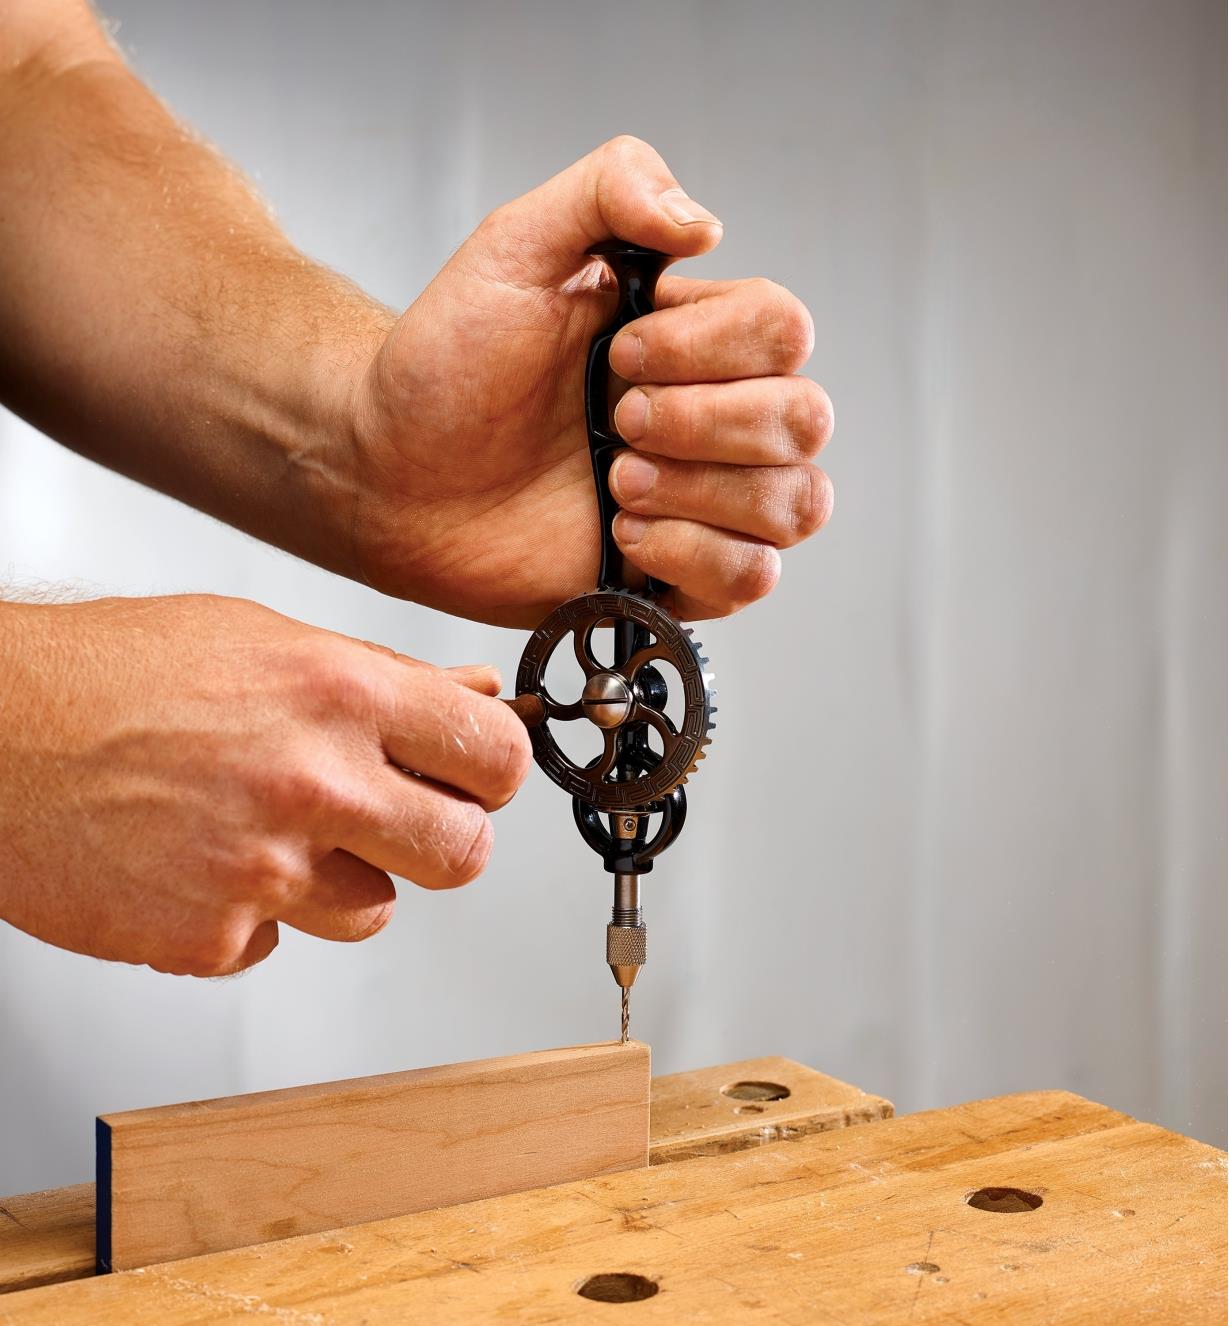 Drilling a hole in the edge of a board with the replica egg-beater drill